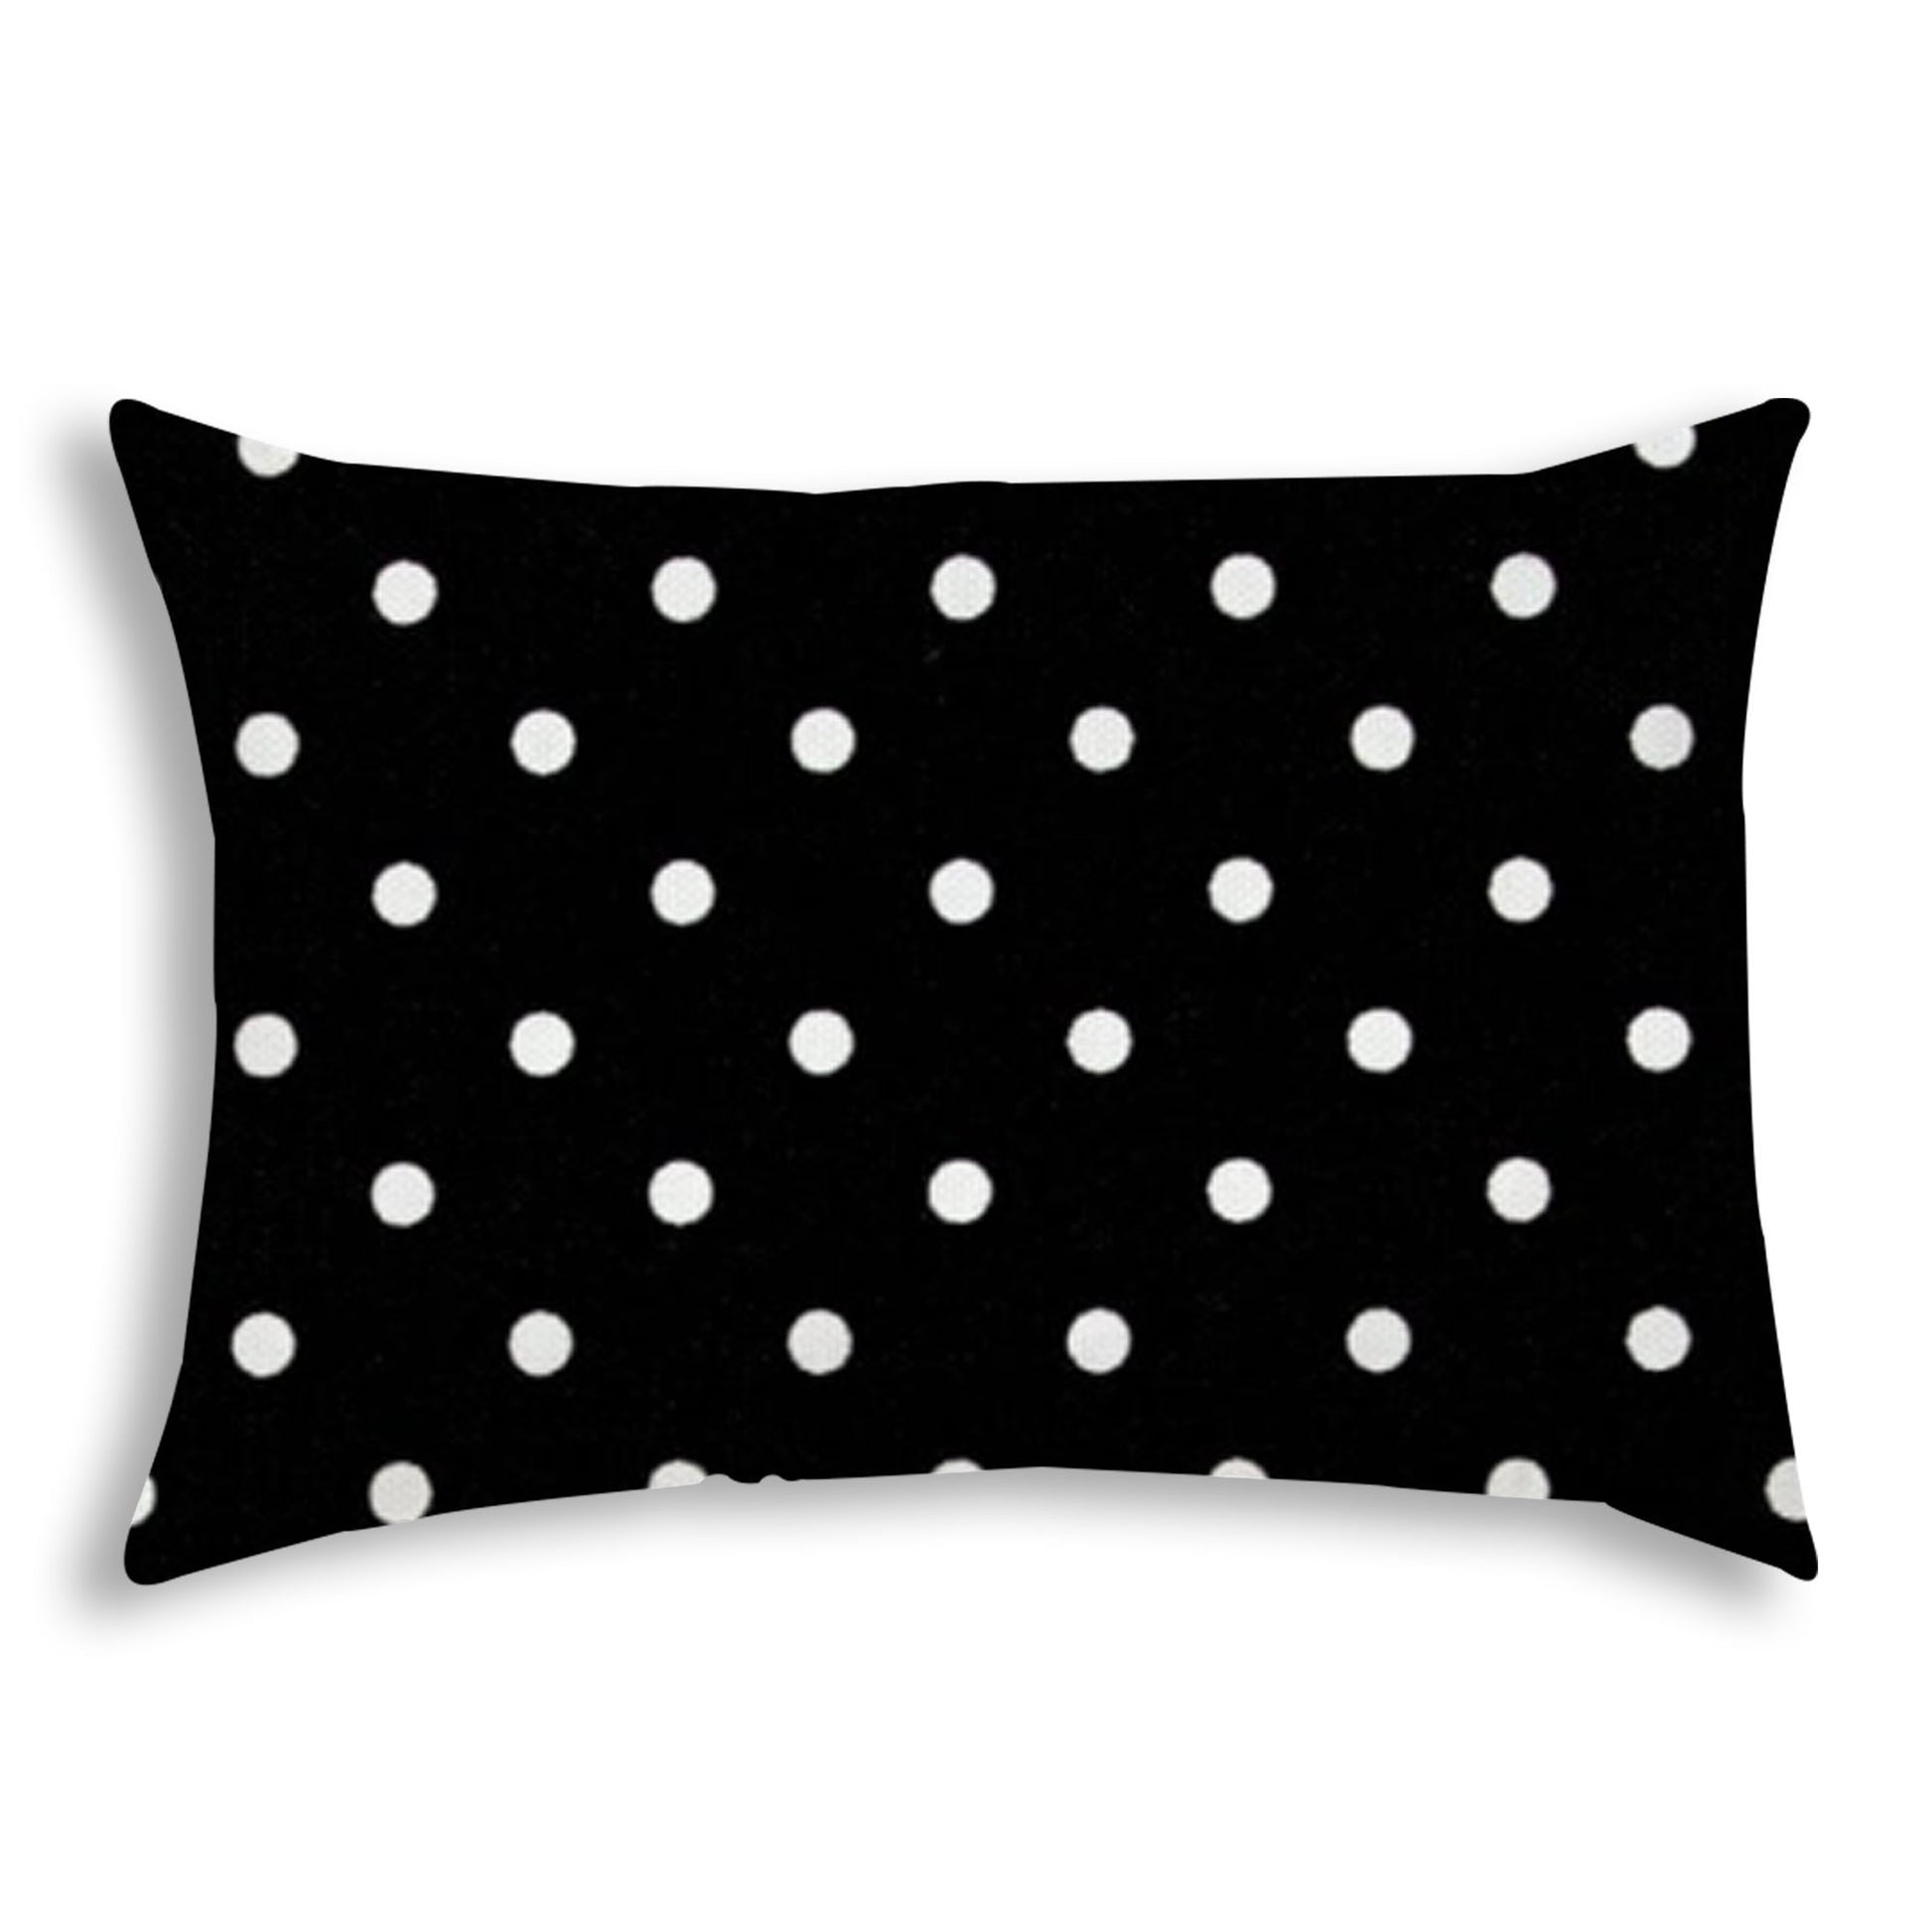 DINER DOT Black Indoor Outdoor Pillow Sewn Closure multicolor-polyester